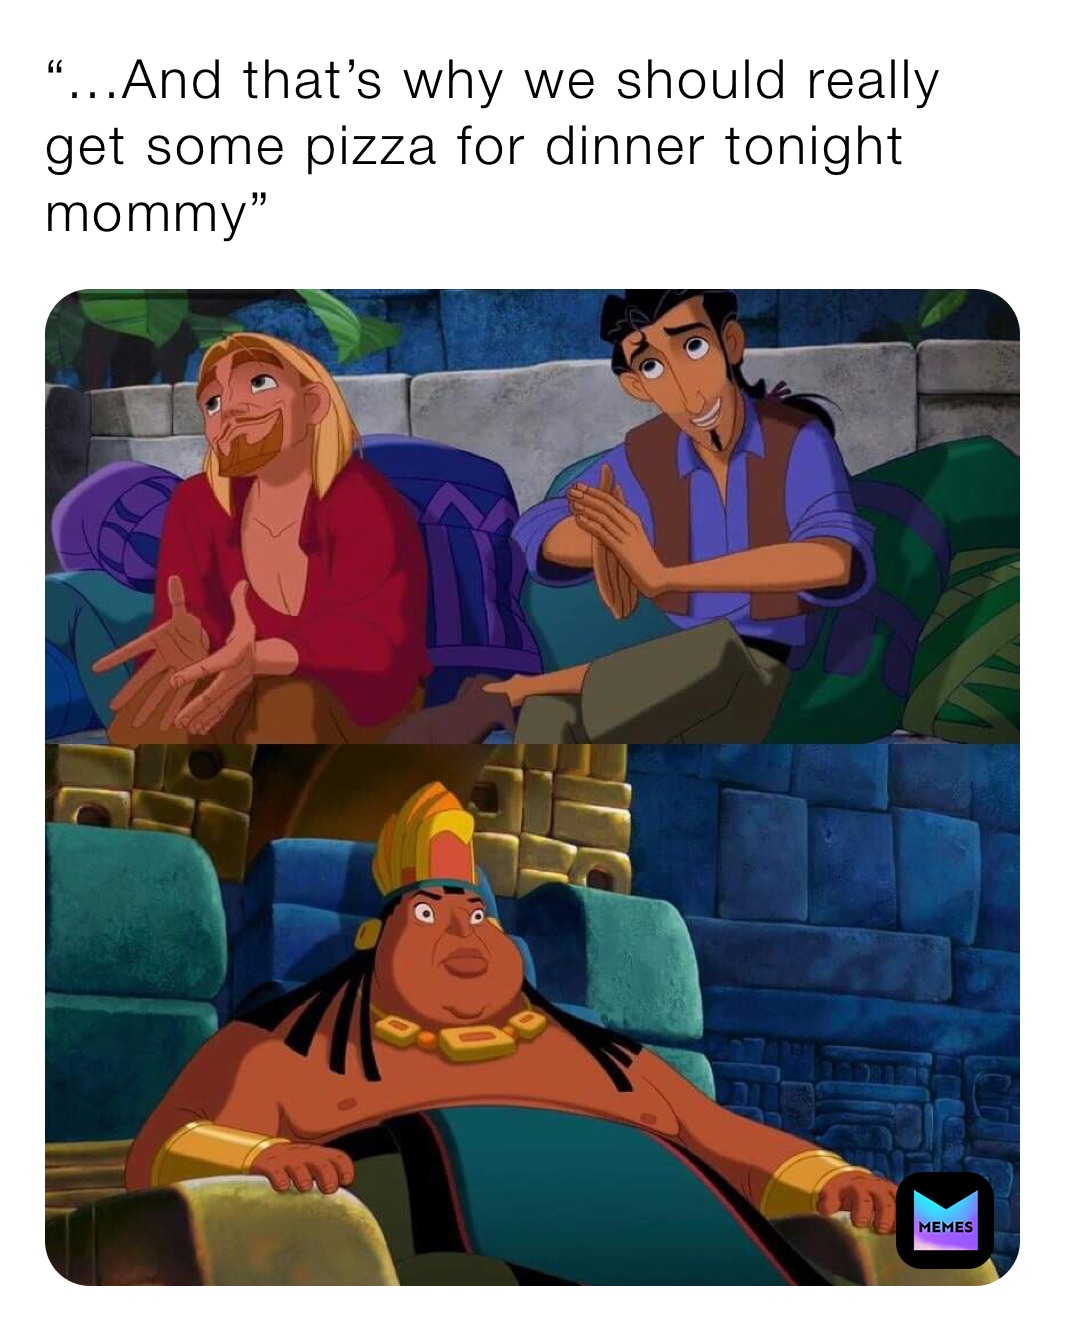 “...And that’s why we should really get some pizza for dinner tonight mommy”